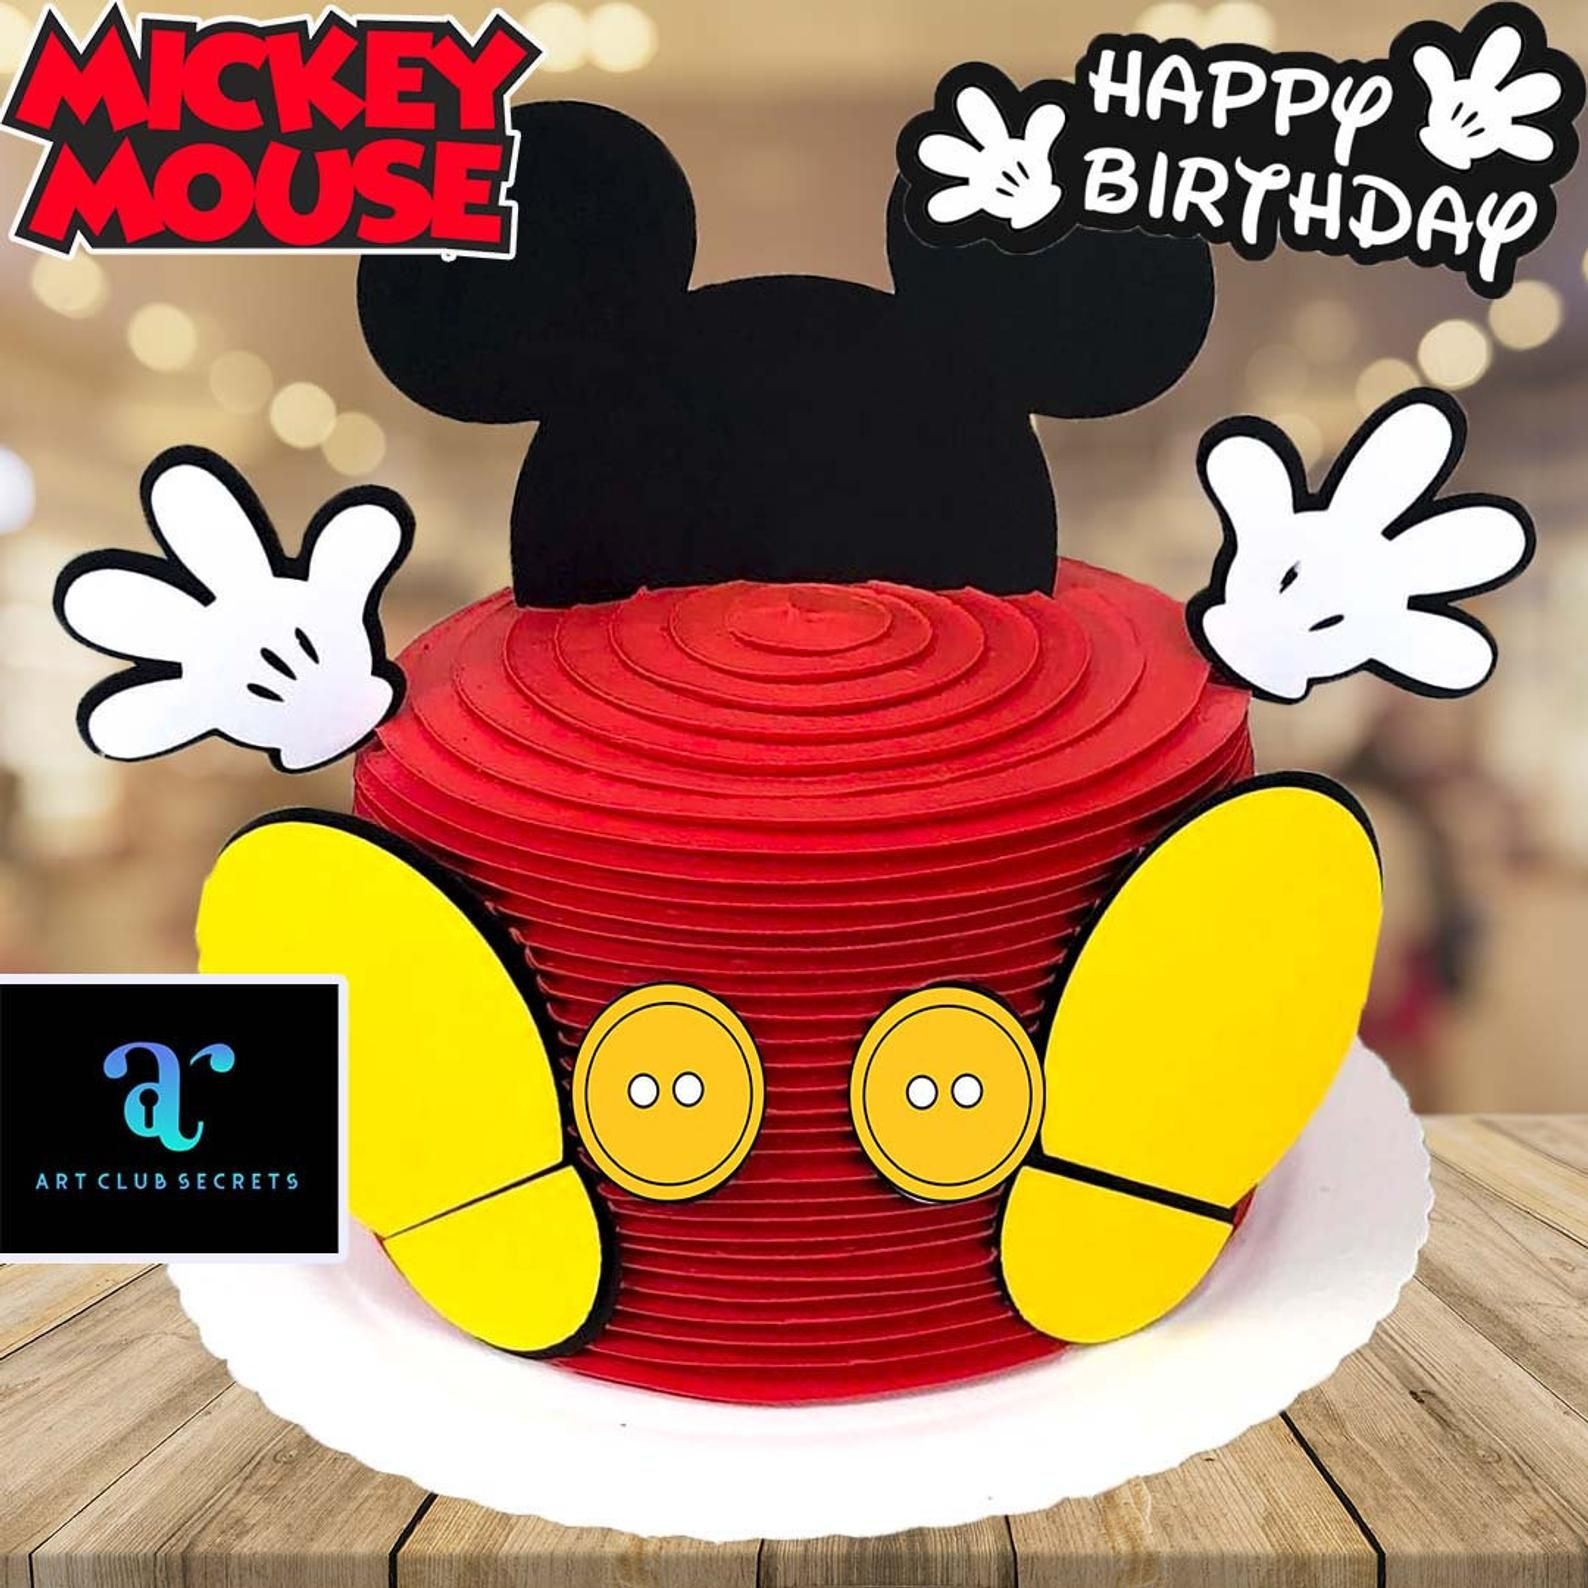 Mickey Mouse Cake Topper Cake Decor Digital Files DIY Printable Centerpiece Patterns PDF Files Instant Download To Print Etsy Mickey Mouse Cake Topper Mickey Mouse Birthday Party Supplies Mickey Mouse Cake